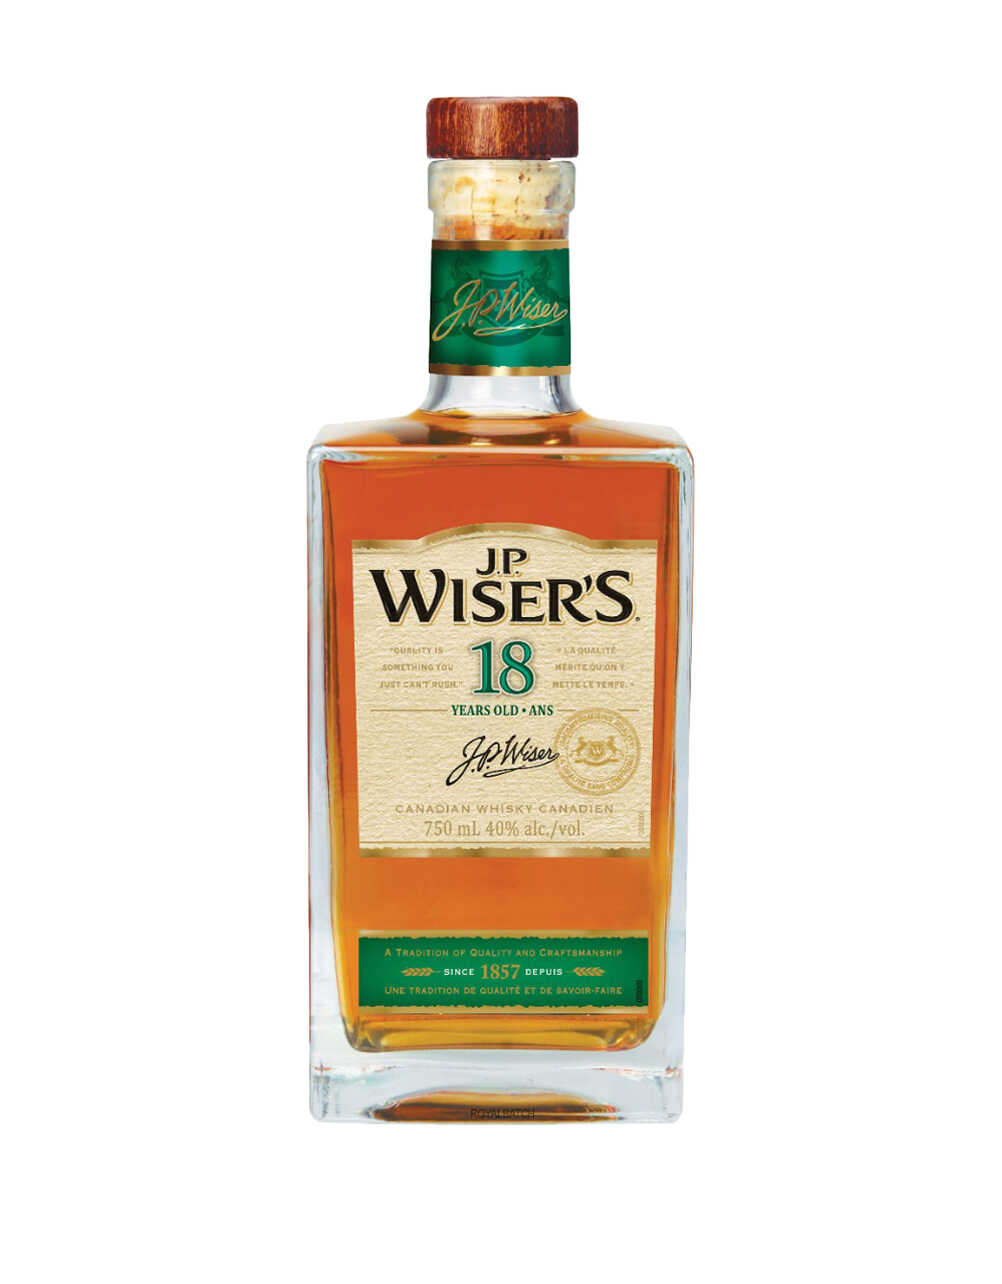 JP Wisers 18 Year Old Canadian Whisky